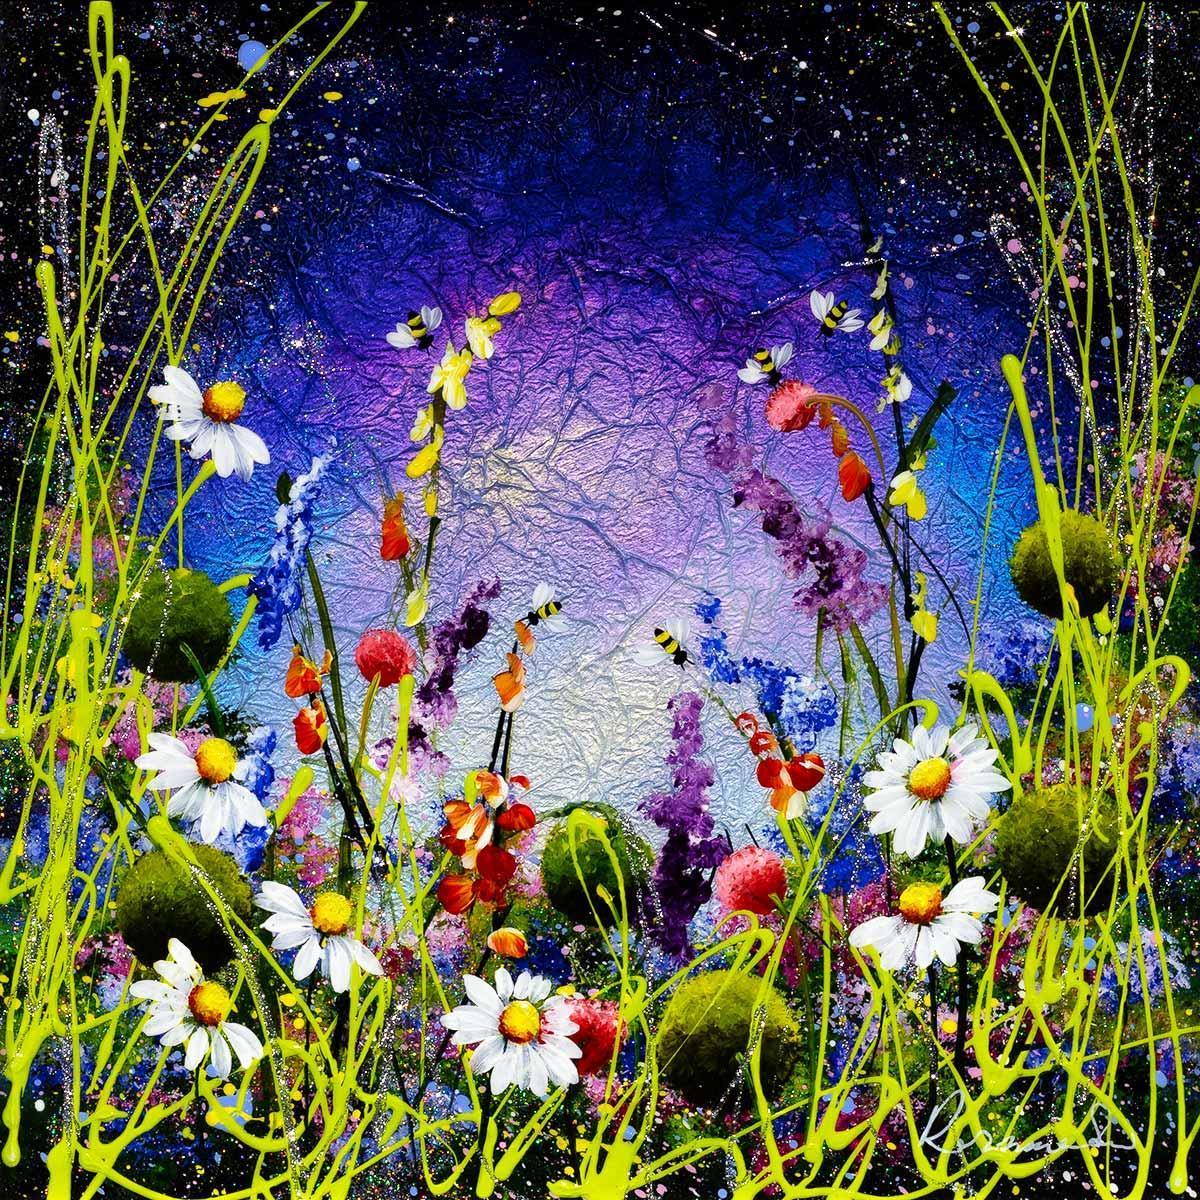 Sparkles In The Meadow I - Original - SOLD